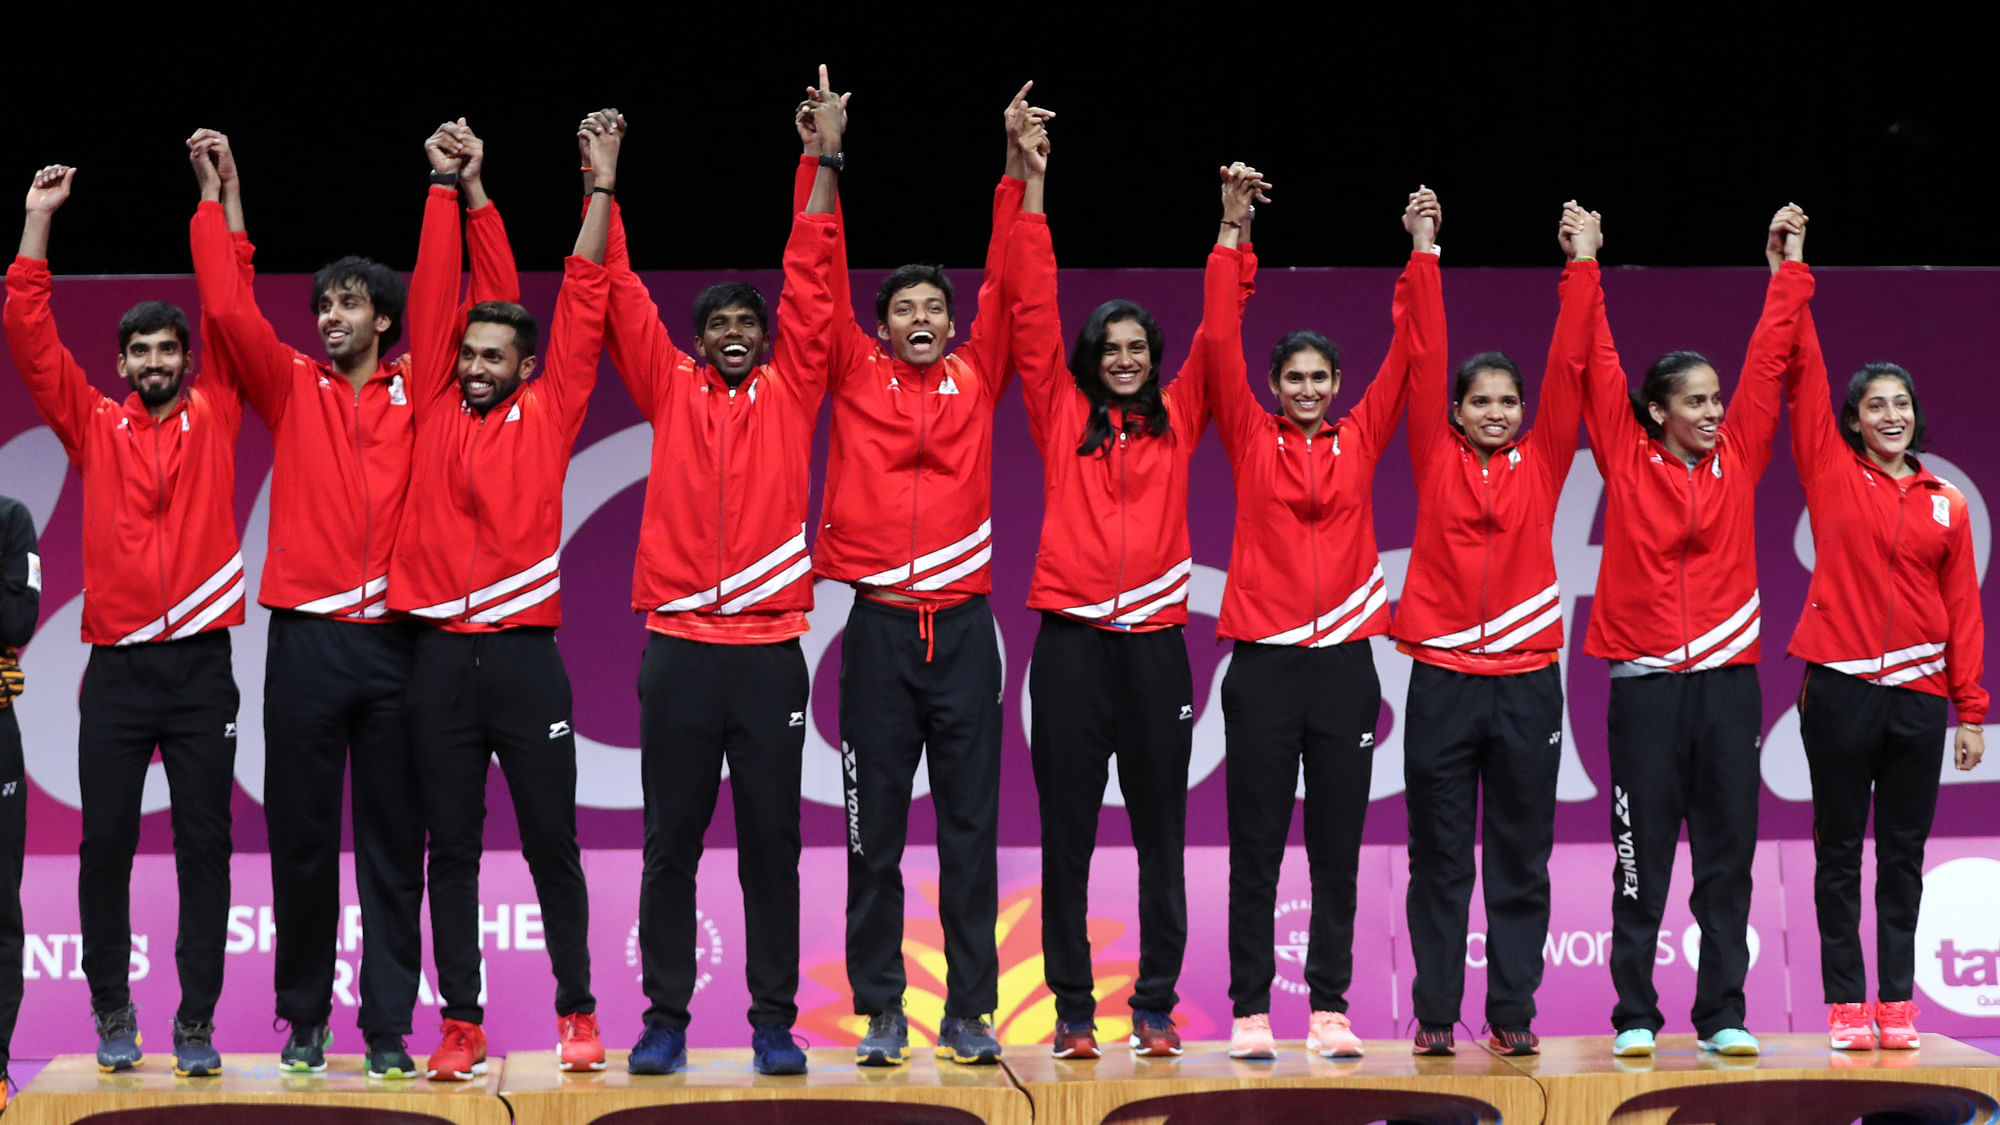 The Indian mixed badminton team on the victory podium after winning the gold.